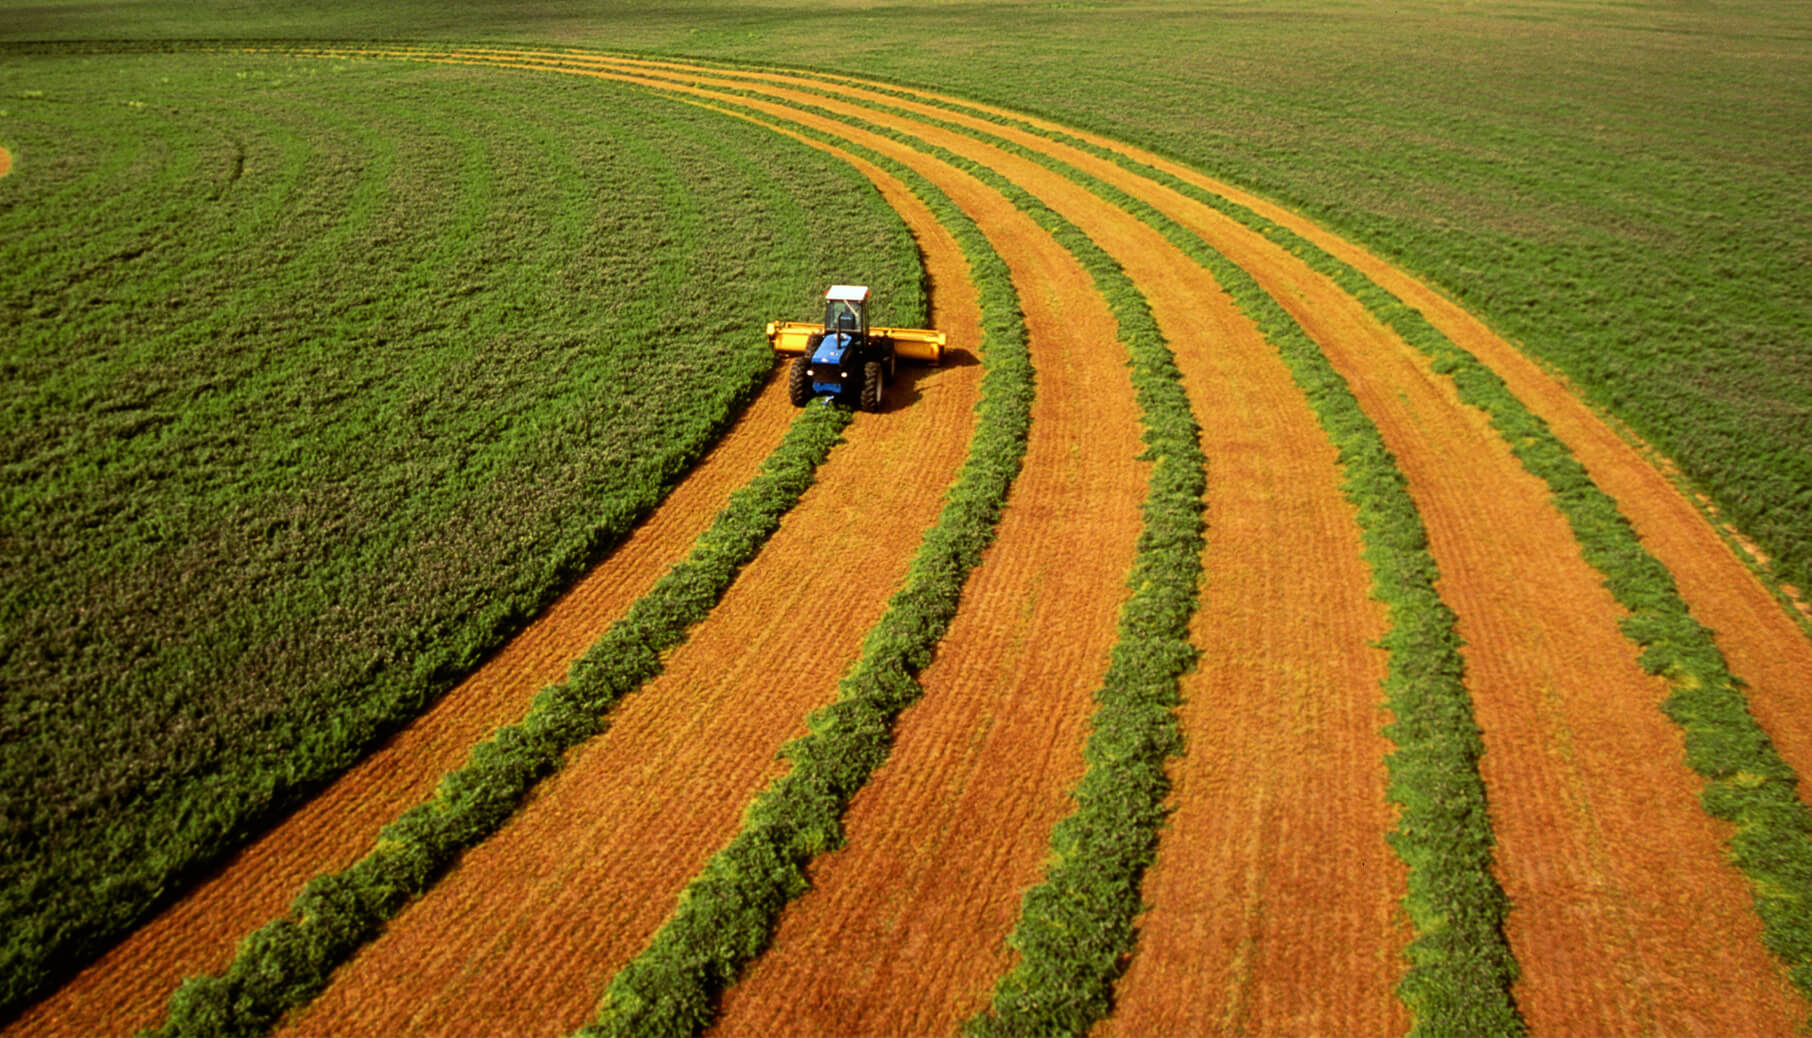 A tractor harvesting crops on a plot of farmland